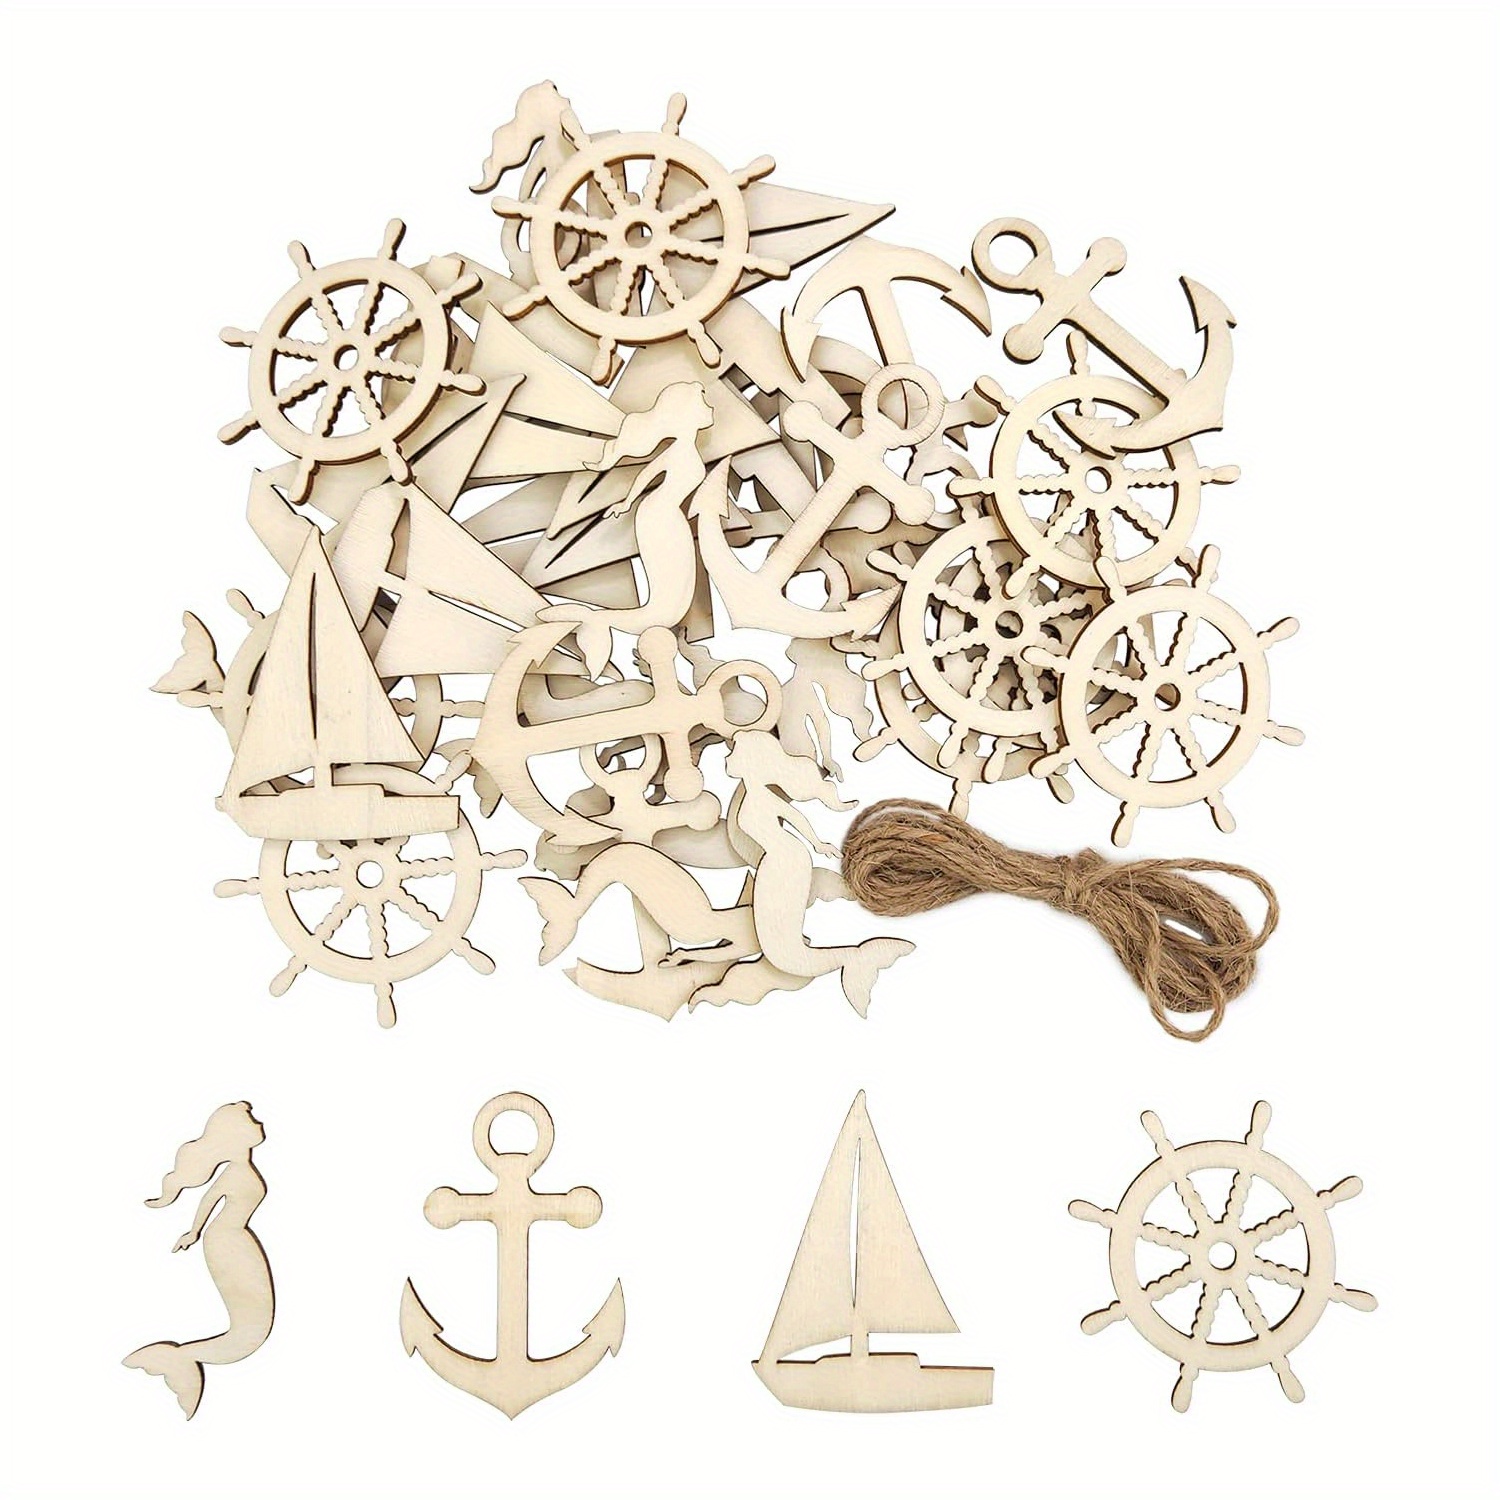 Anchor Unfinished Wood Cutouts Variety Of Sizes / Artistic Craft